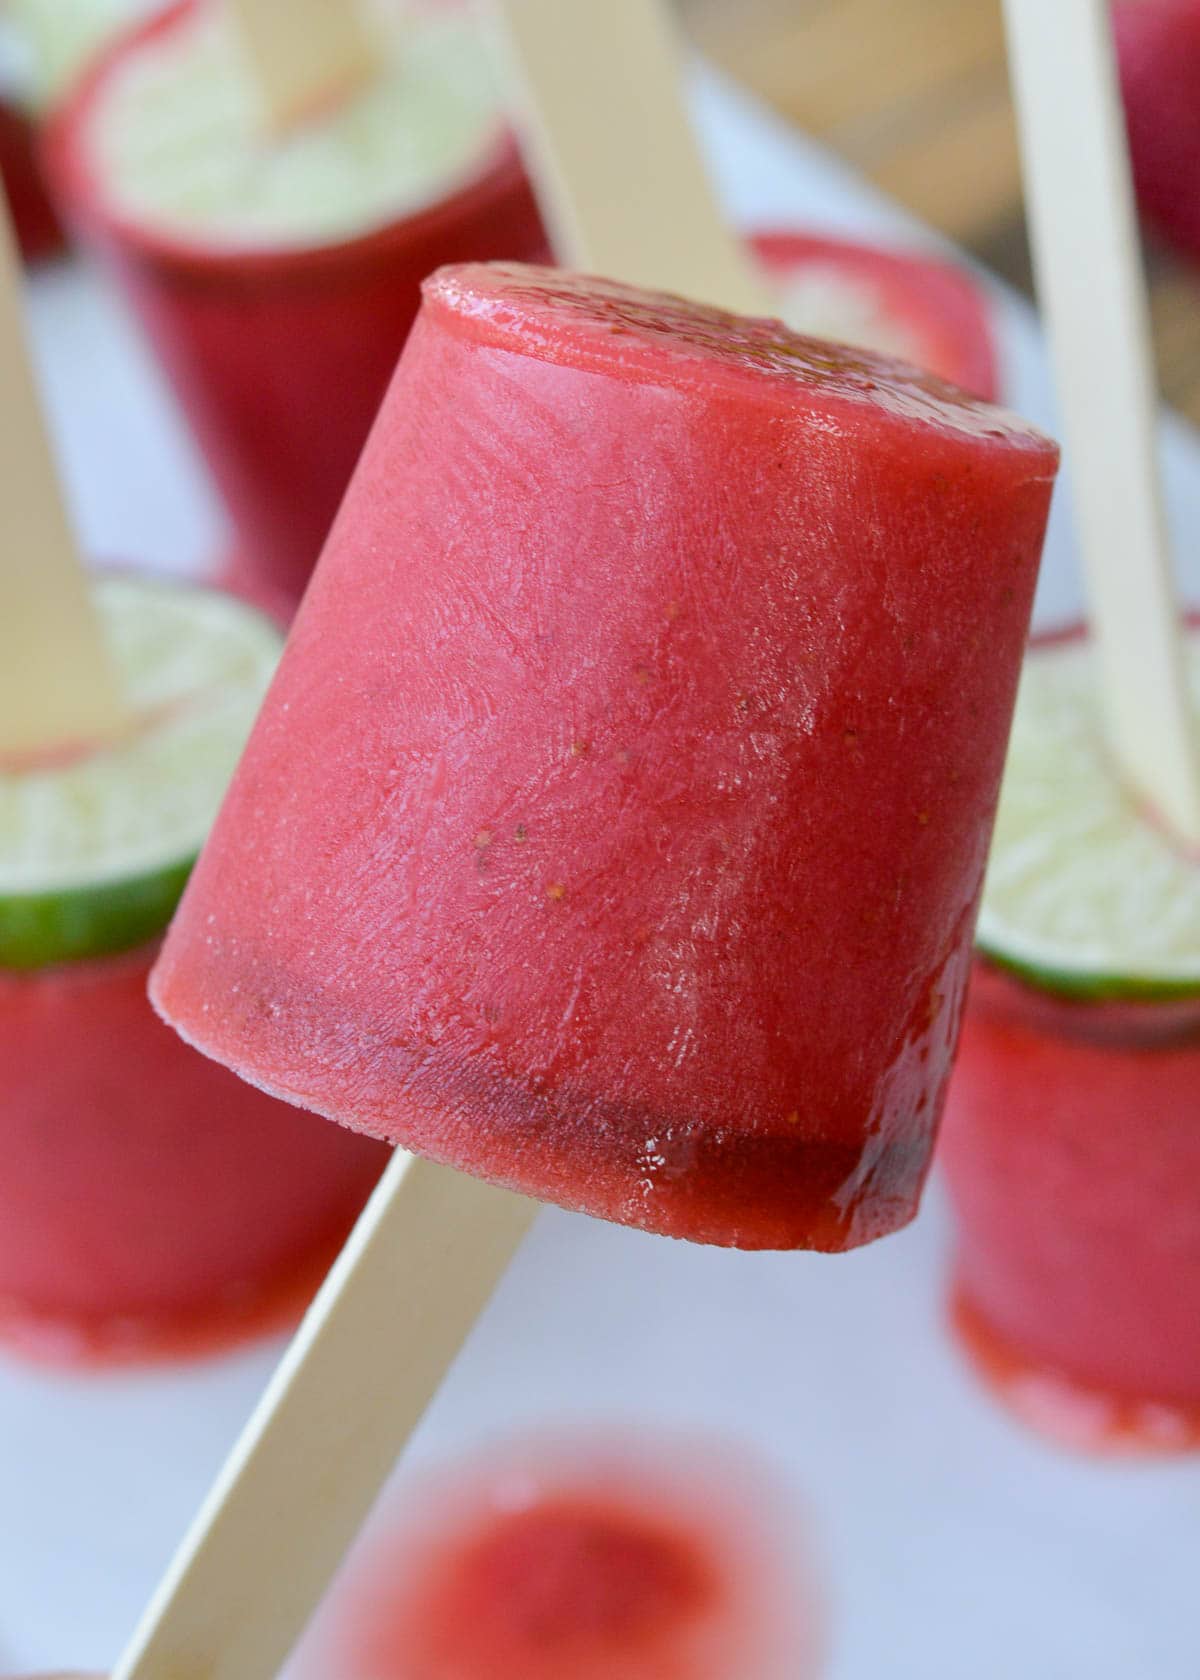 These delicious Low Carb Strawberry Margarita Popsicles will keep you cool all summer long! Just 5 net carbs each for these tasty tequila popsicles.